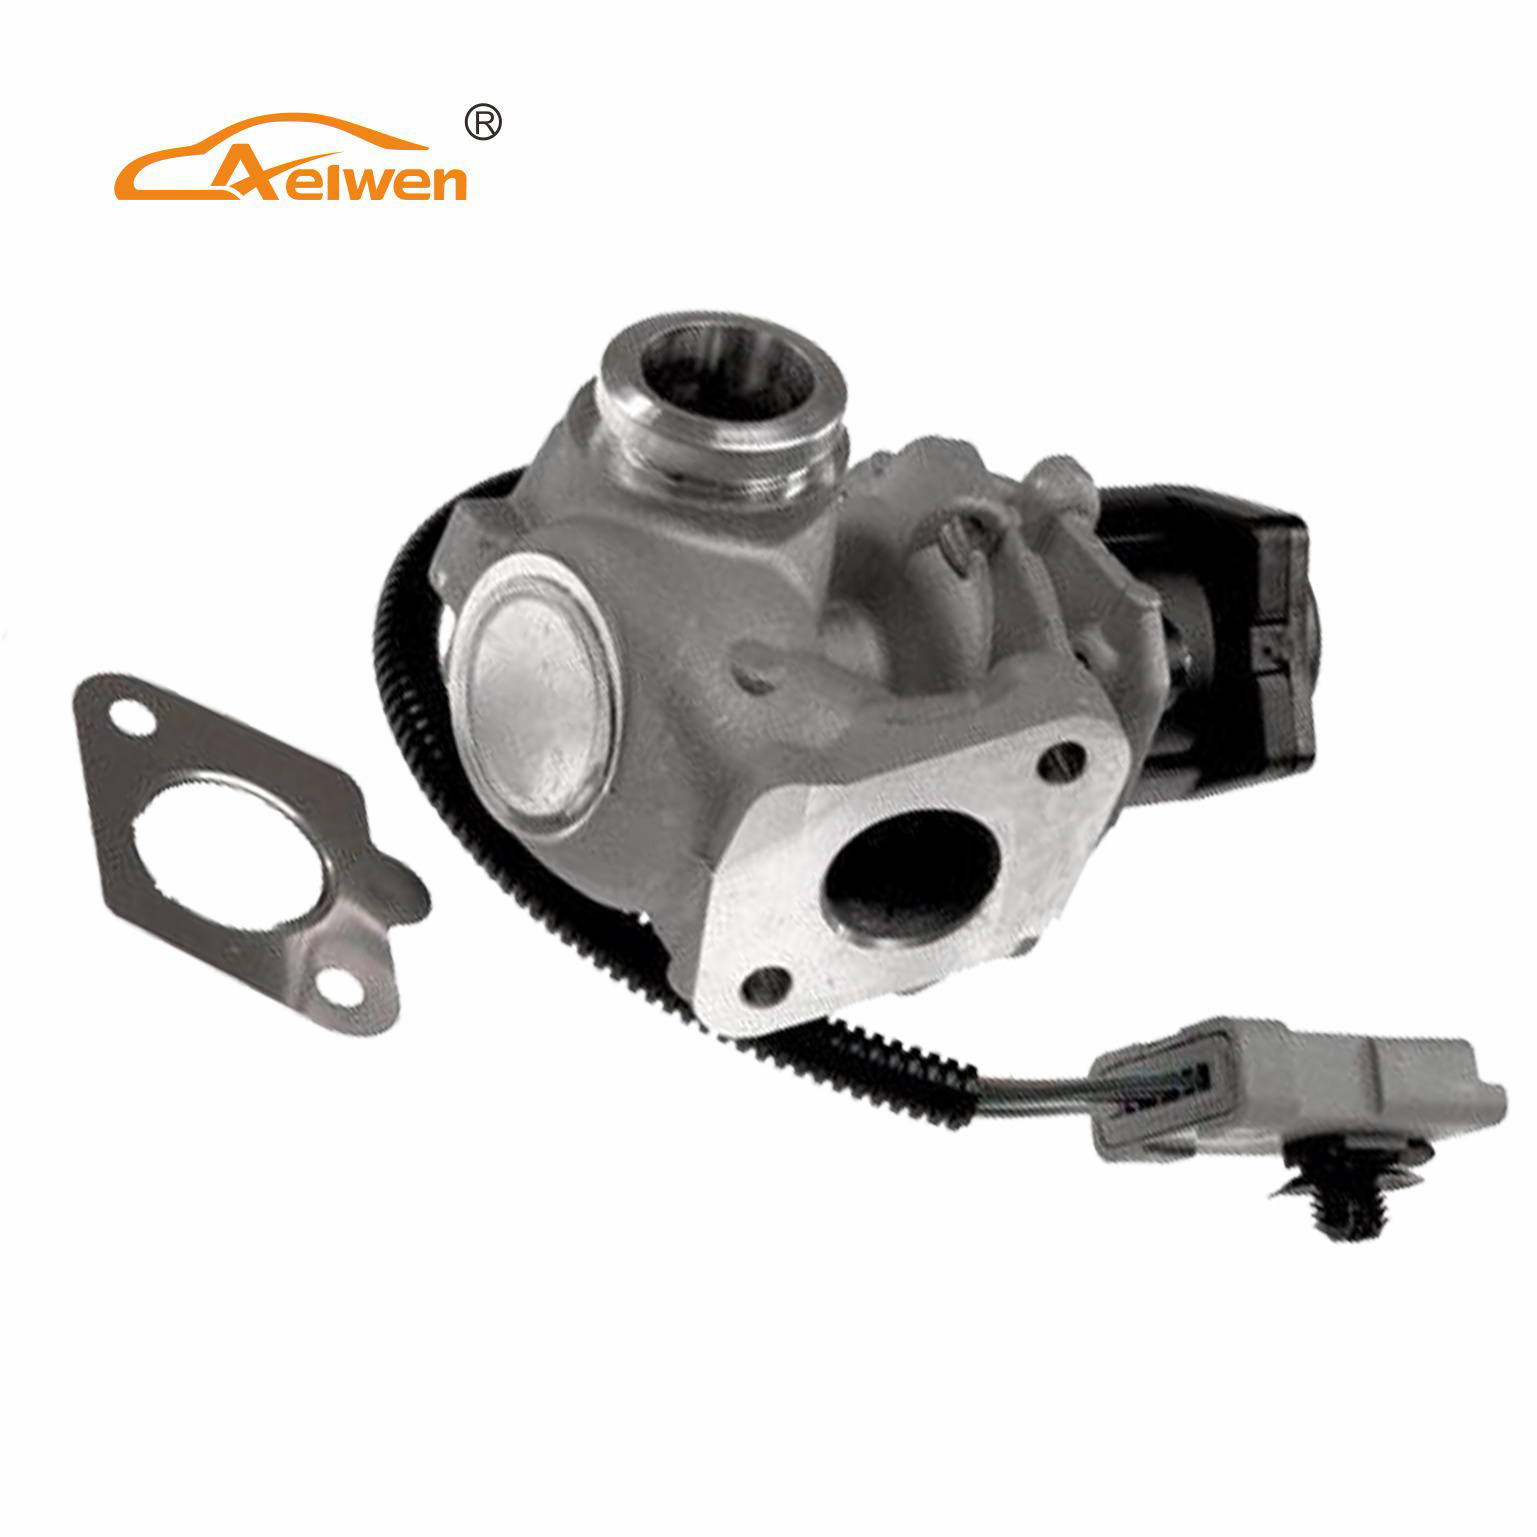 China Aelwen Egr Valve for Ford (3M5Q9D475CA 1353152 9127)